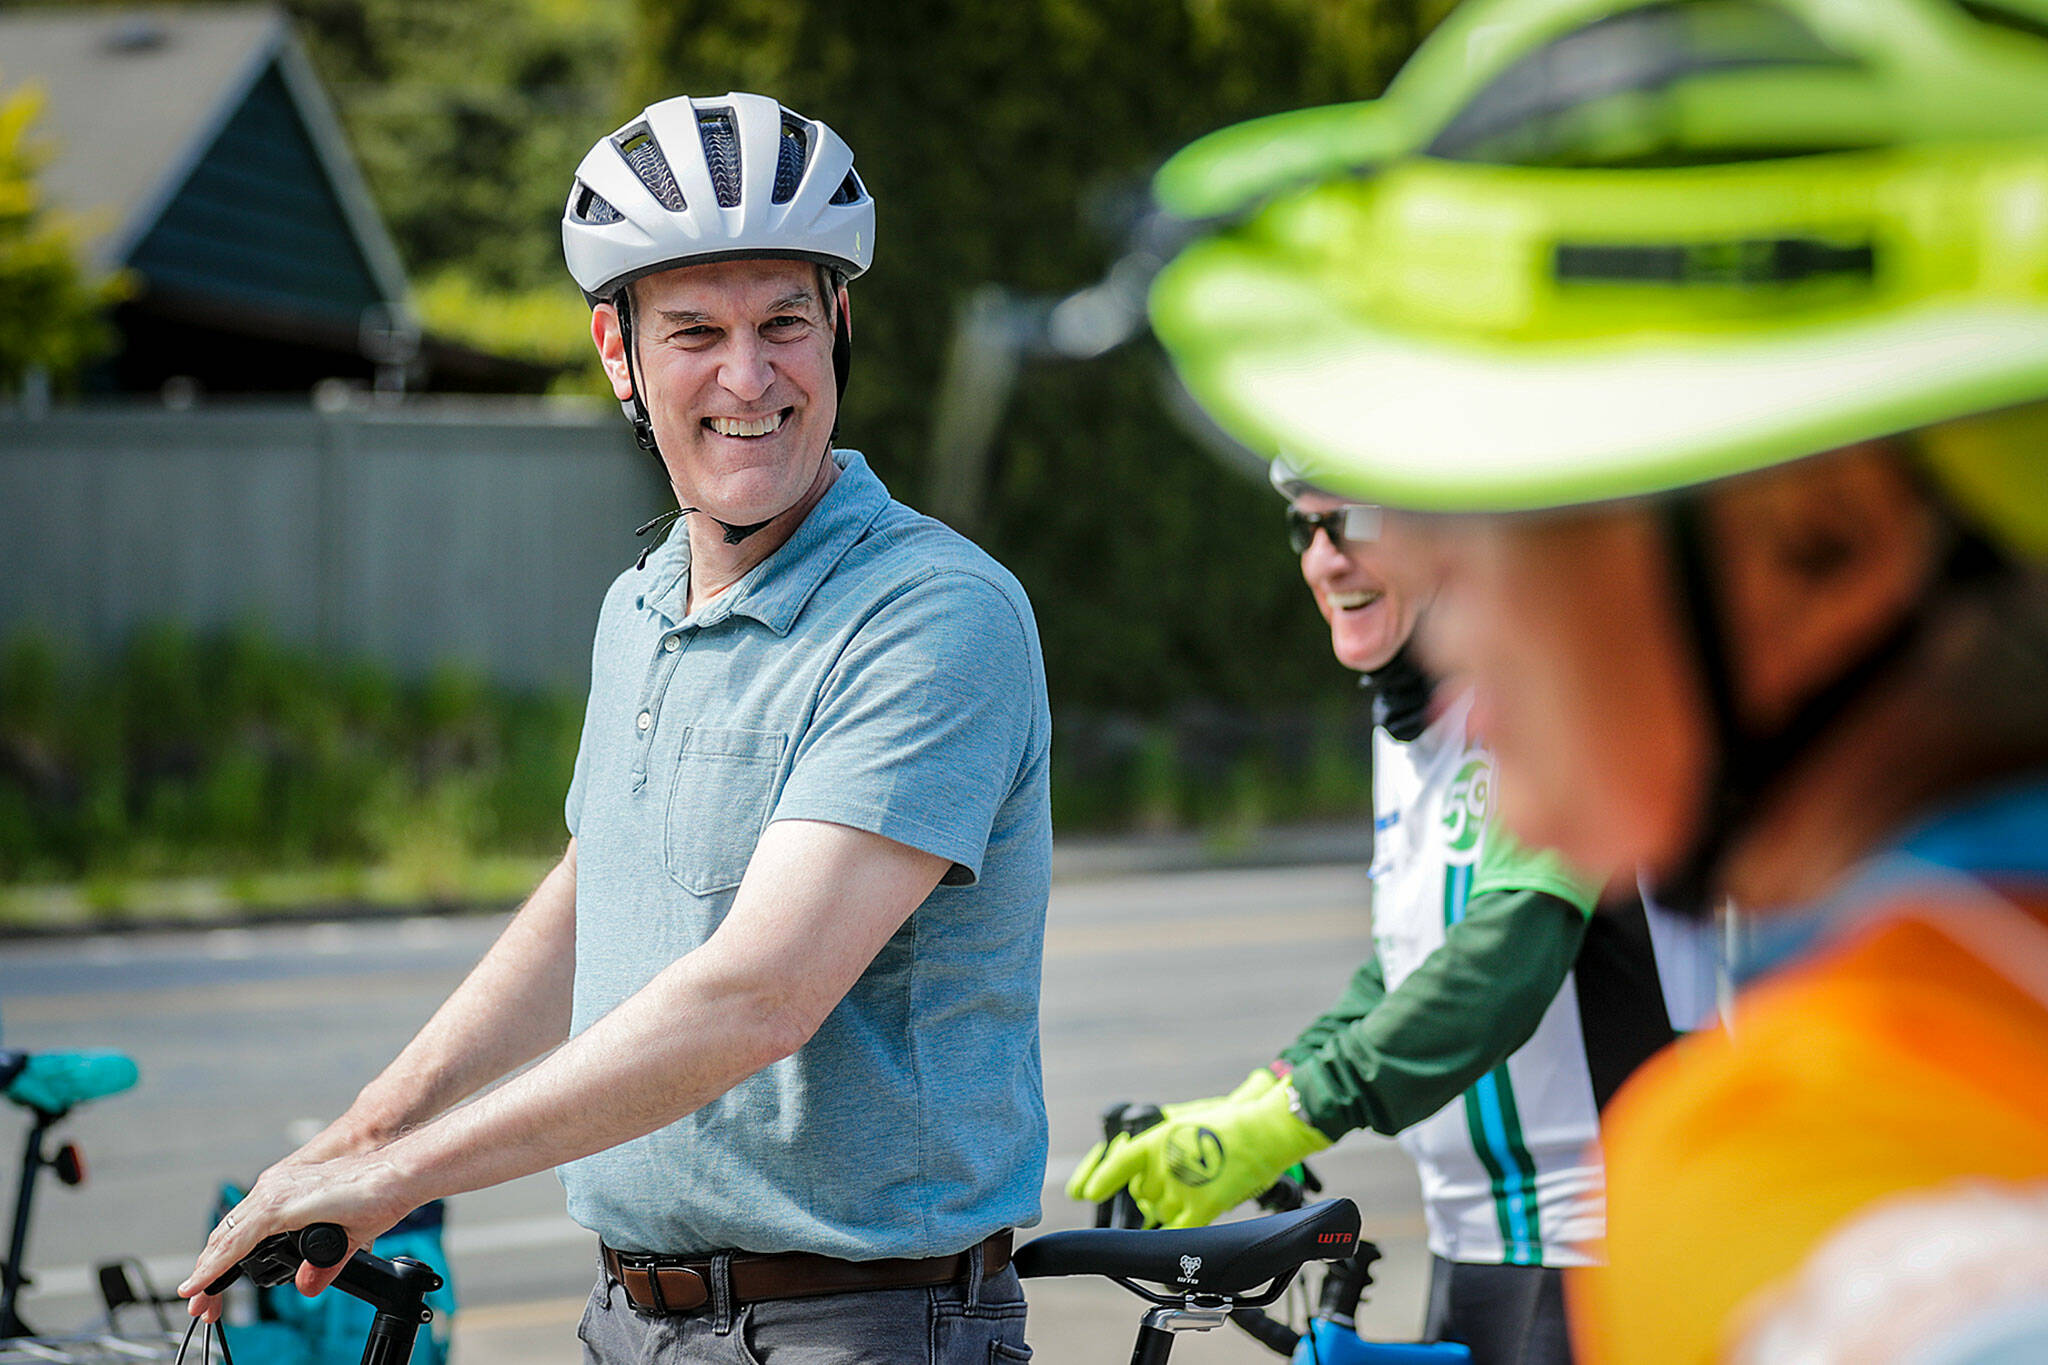 Rep. Rick Larsen on May 23 shares a laugh during a bike tour of the Interurban Trail through Mountlake Terrace and Edmonds. (Kevin Clark / The Herald)